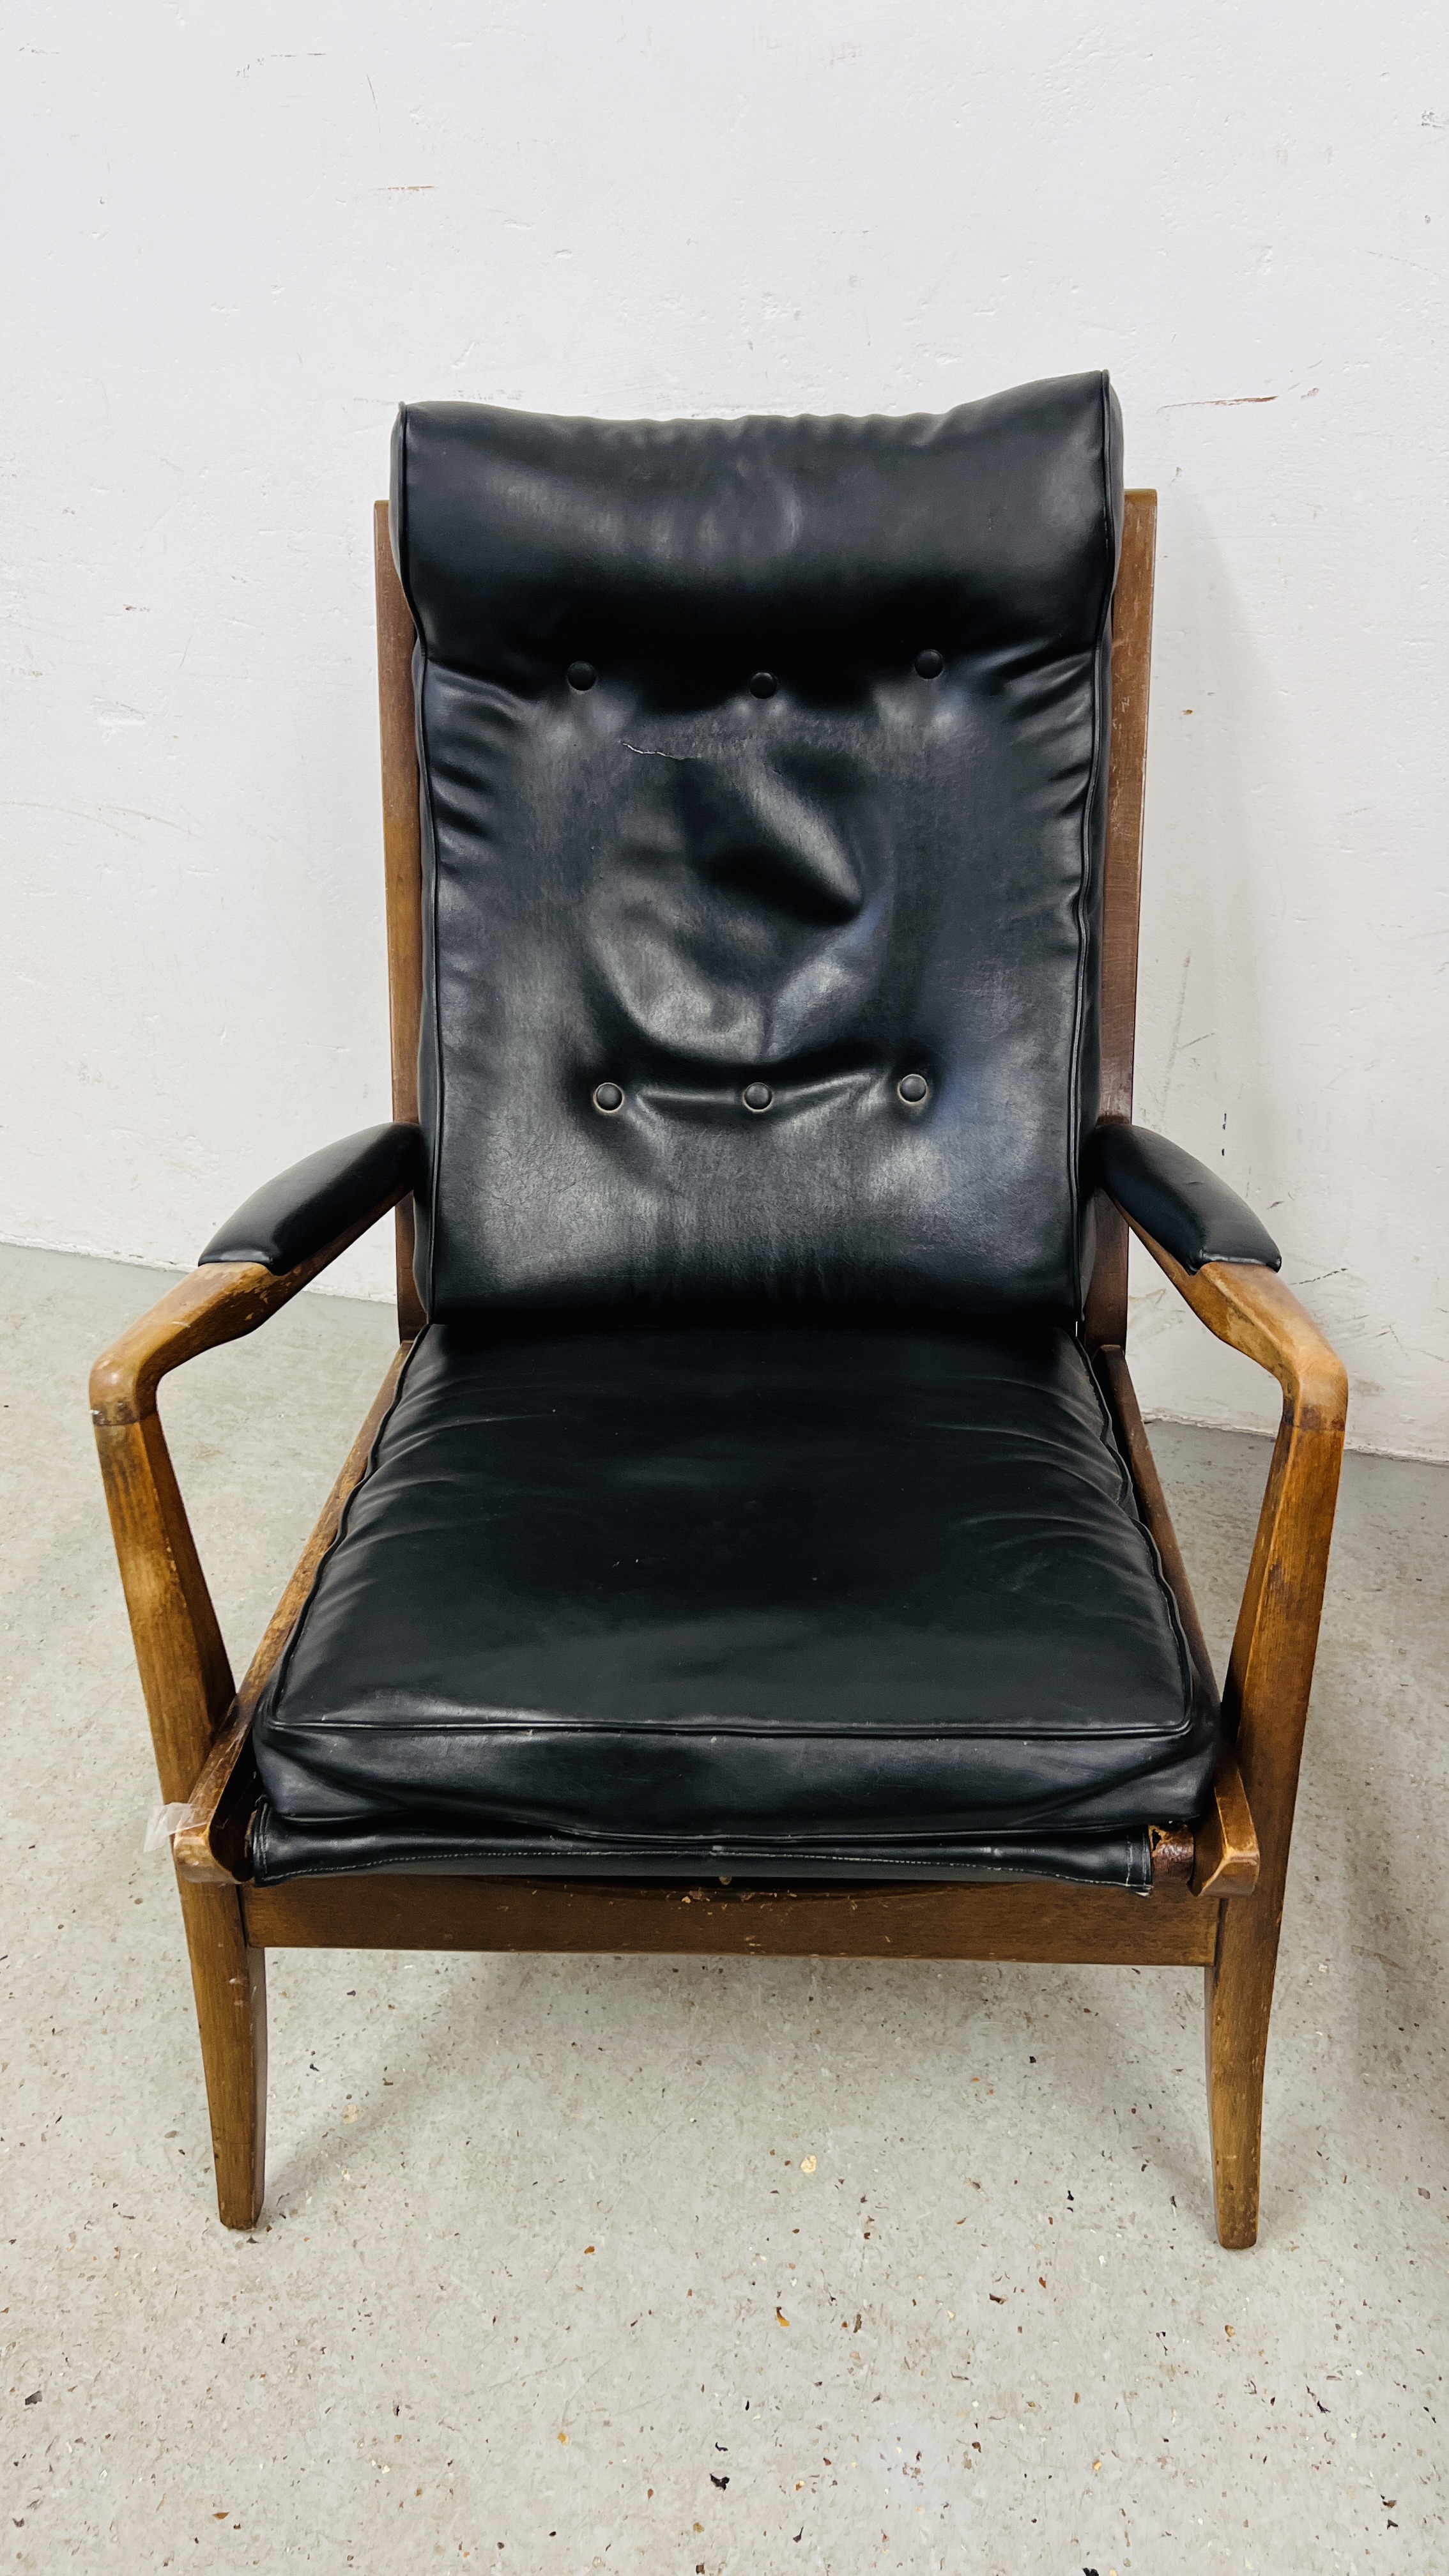 A PAIR OF RETRO CONTEMPORARY BLACK FAUX LEATHER EASY STYLE CHAIR BEARING ORIGINAL MAKERS LABEL - Image 11 of 19